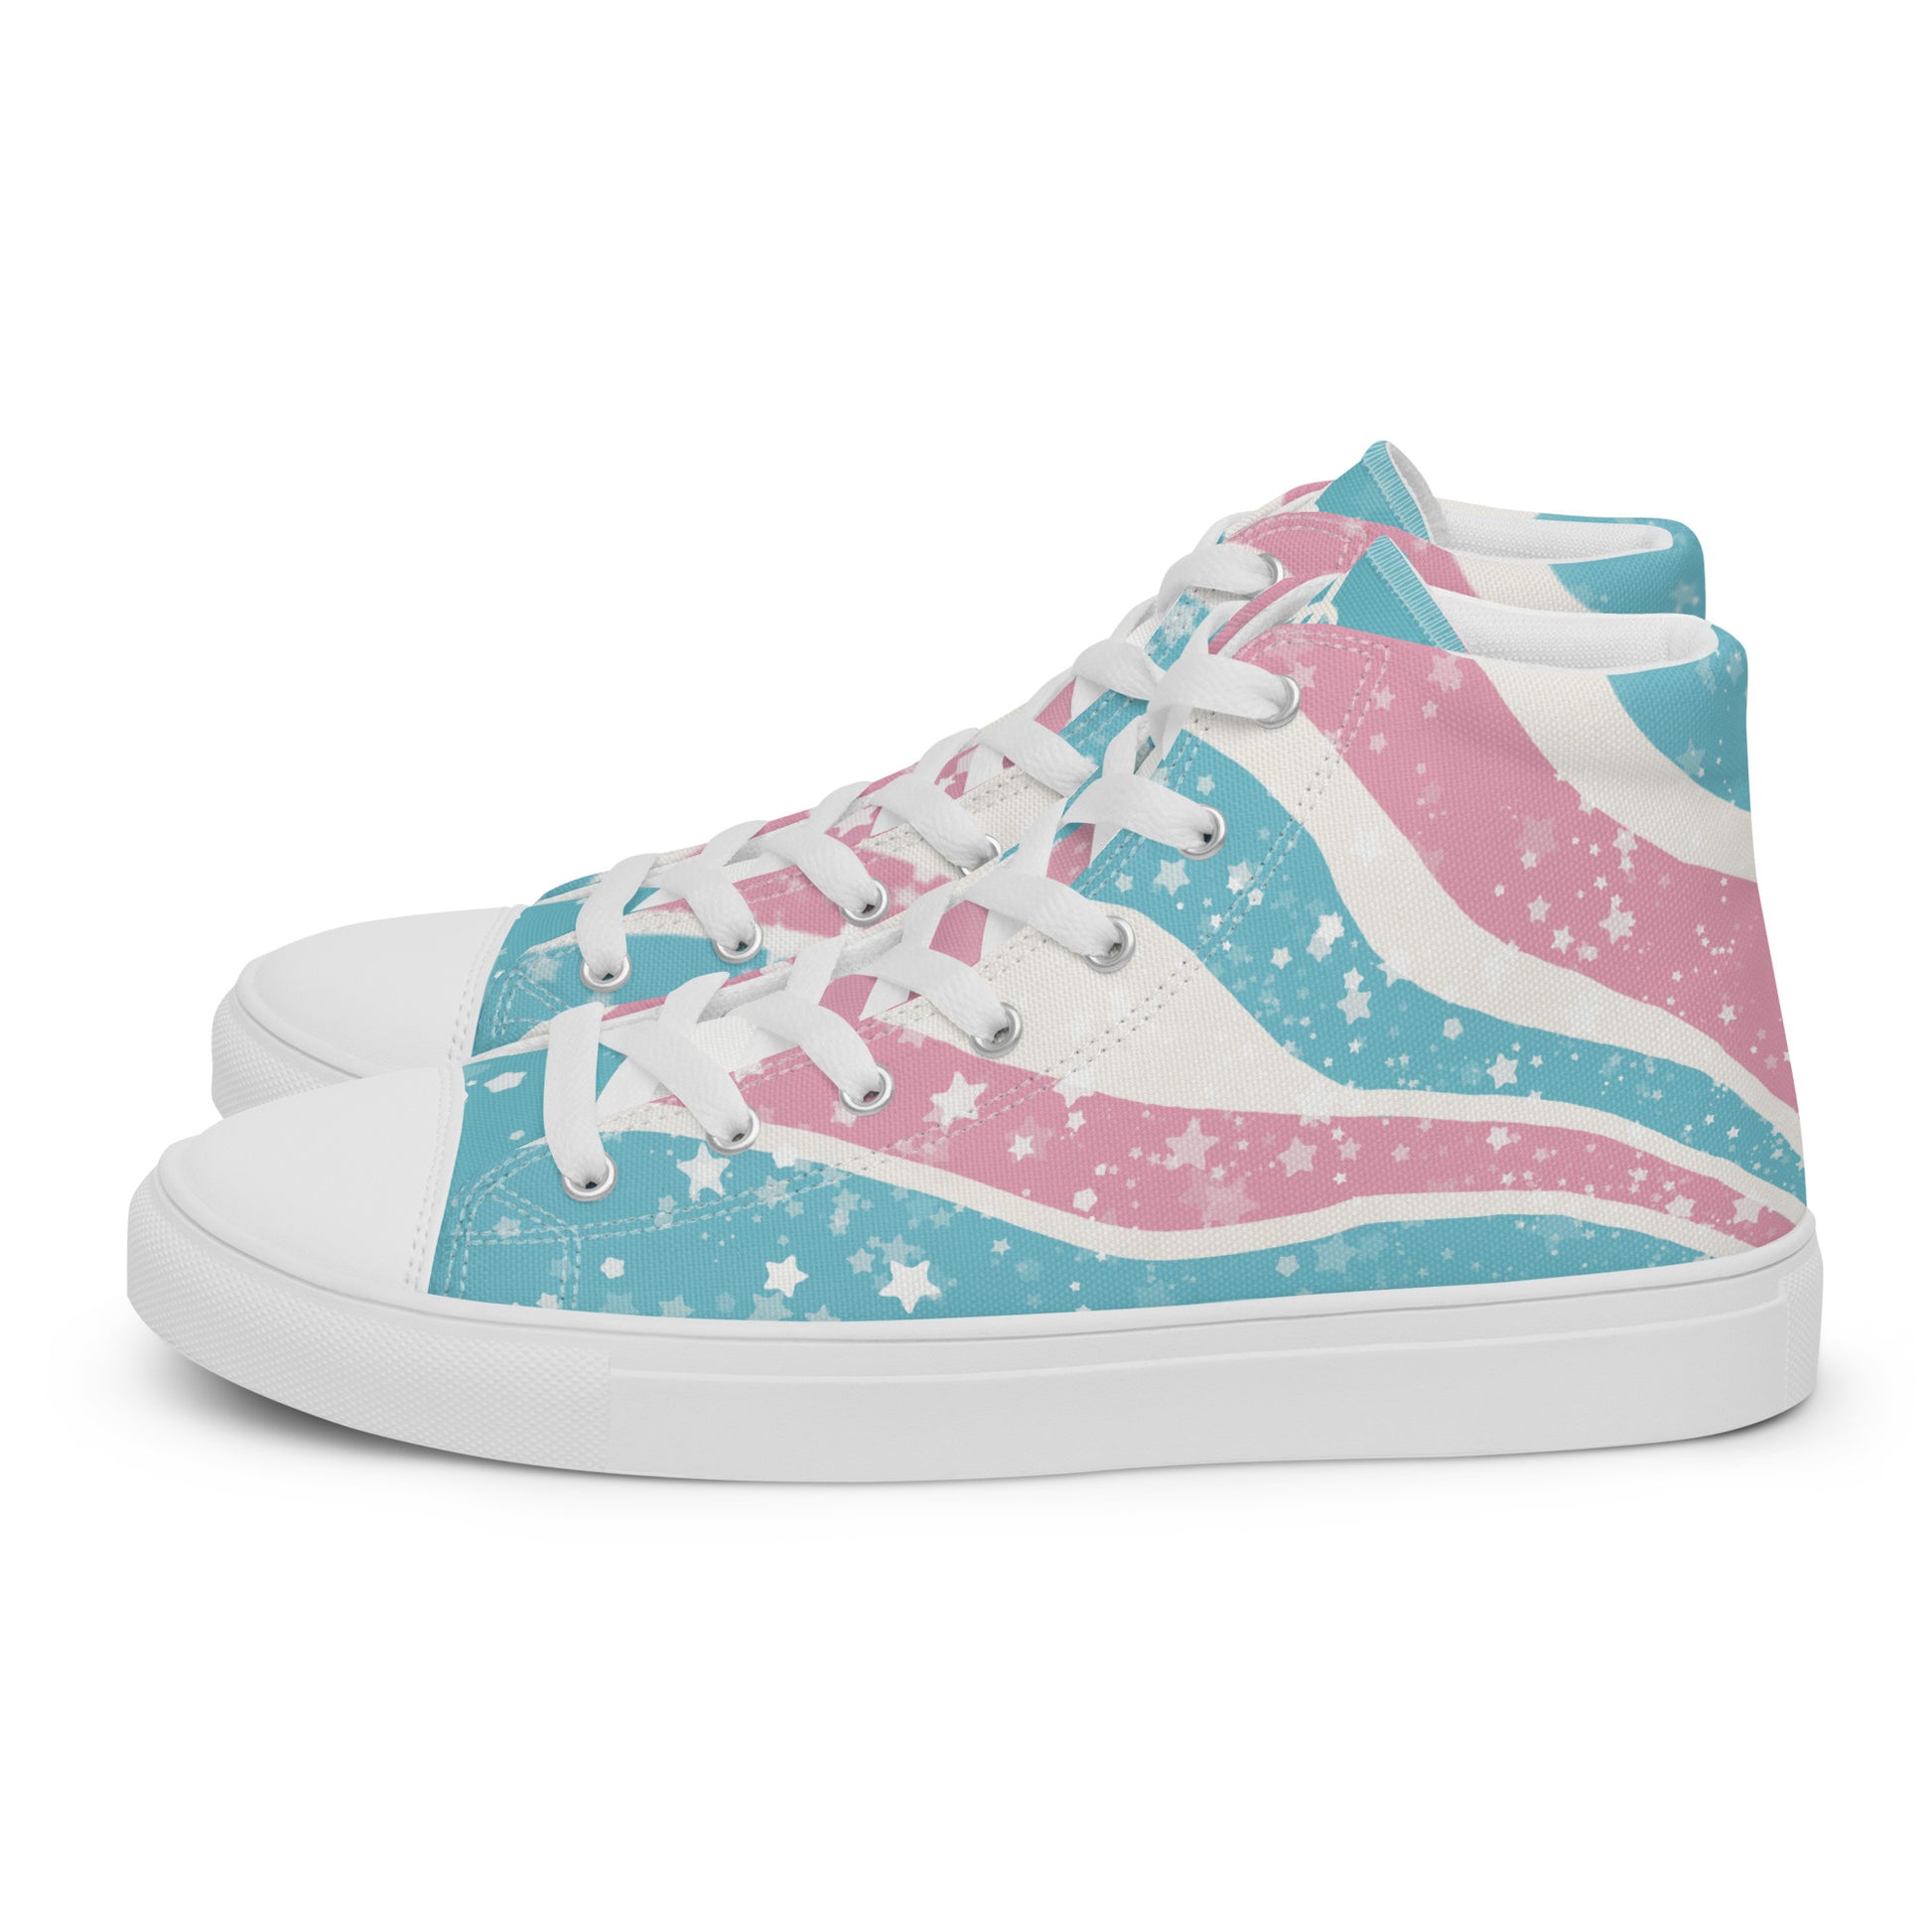 Left view: A pair of high top shoes have way lines starting from the heel and getting larger towards the laces in pink, white, and blue with white stars all over, white laces, and white details.